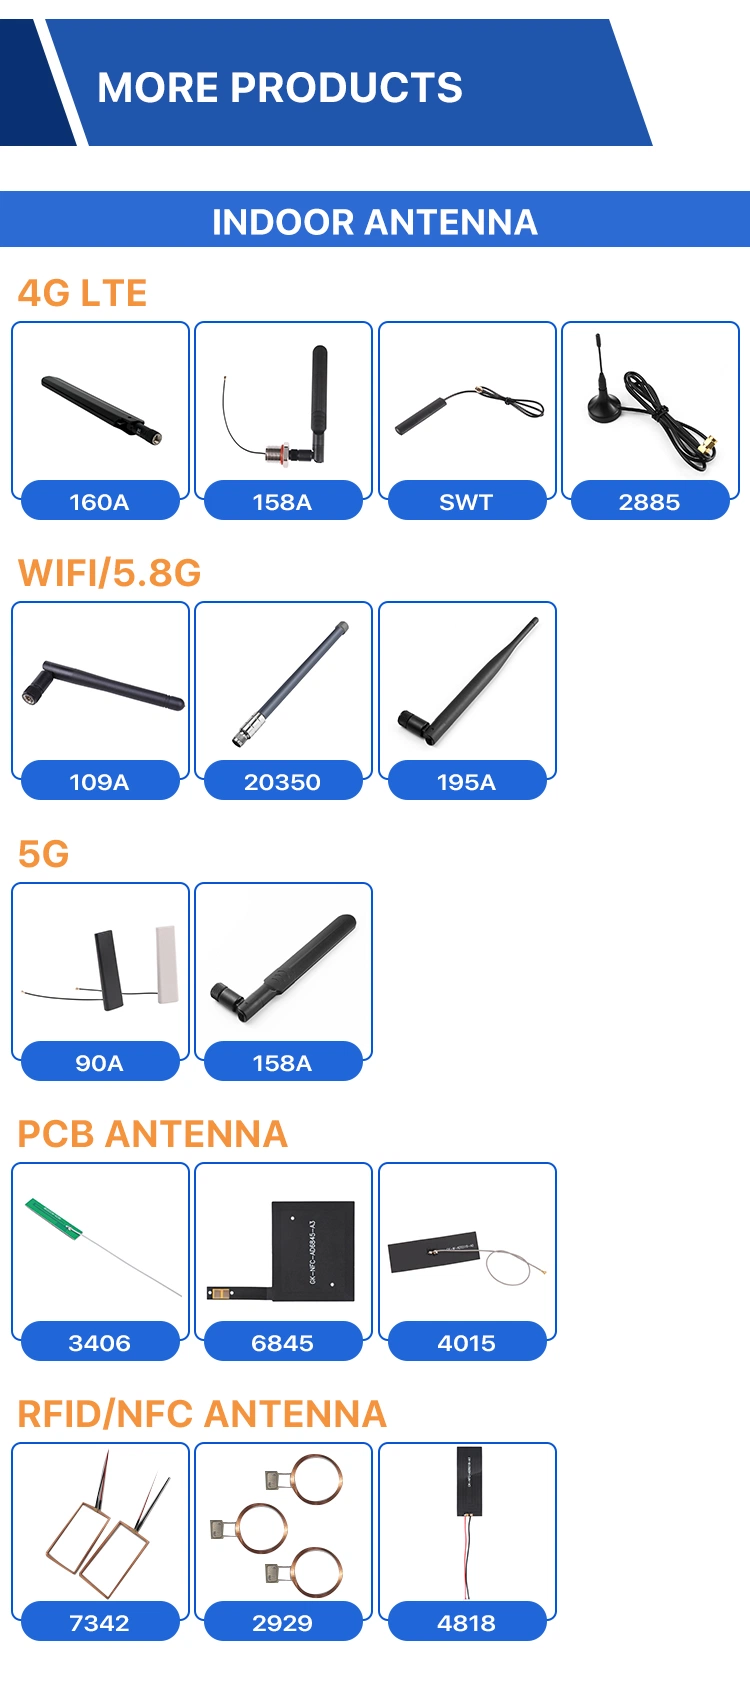 1575.42 and 1561.098 MHz Ceramic Patch Internal Active Gnss Antenna